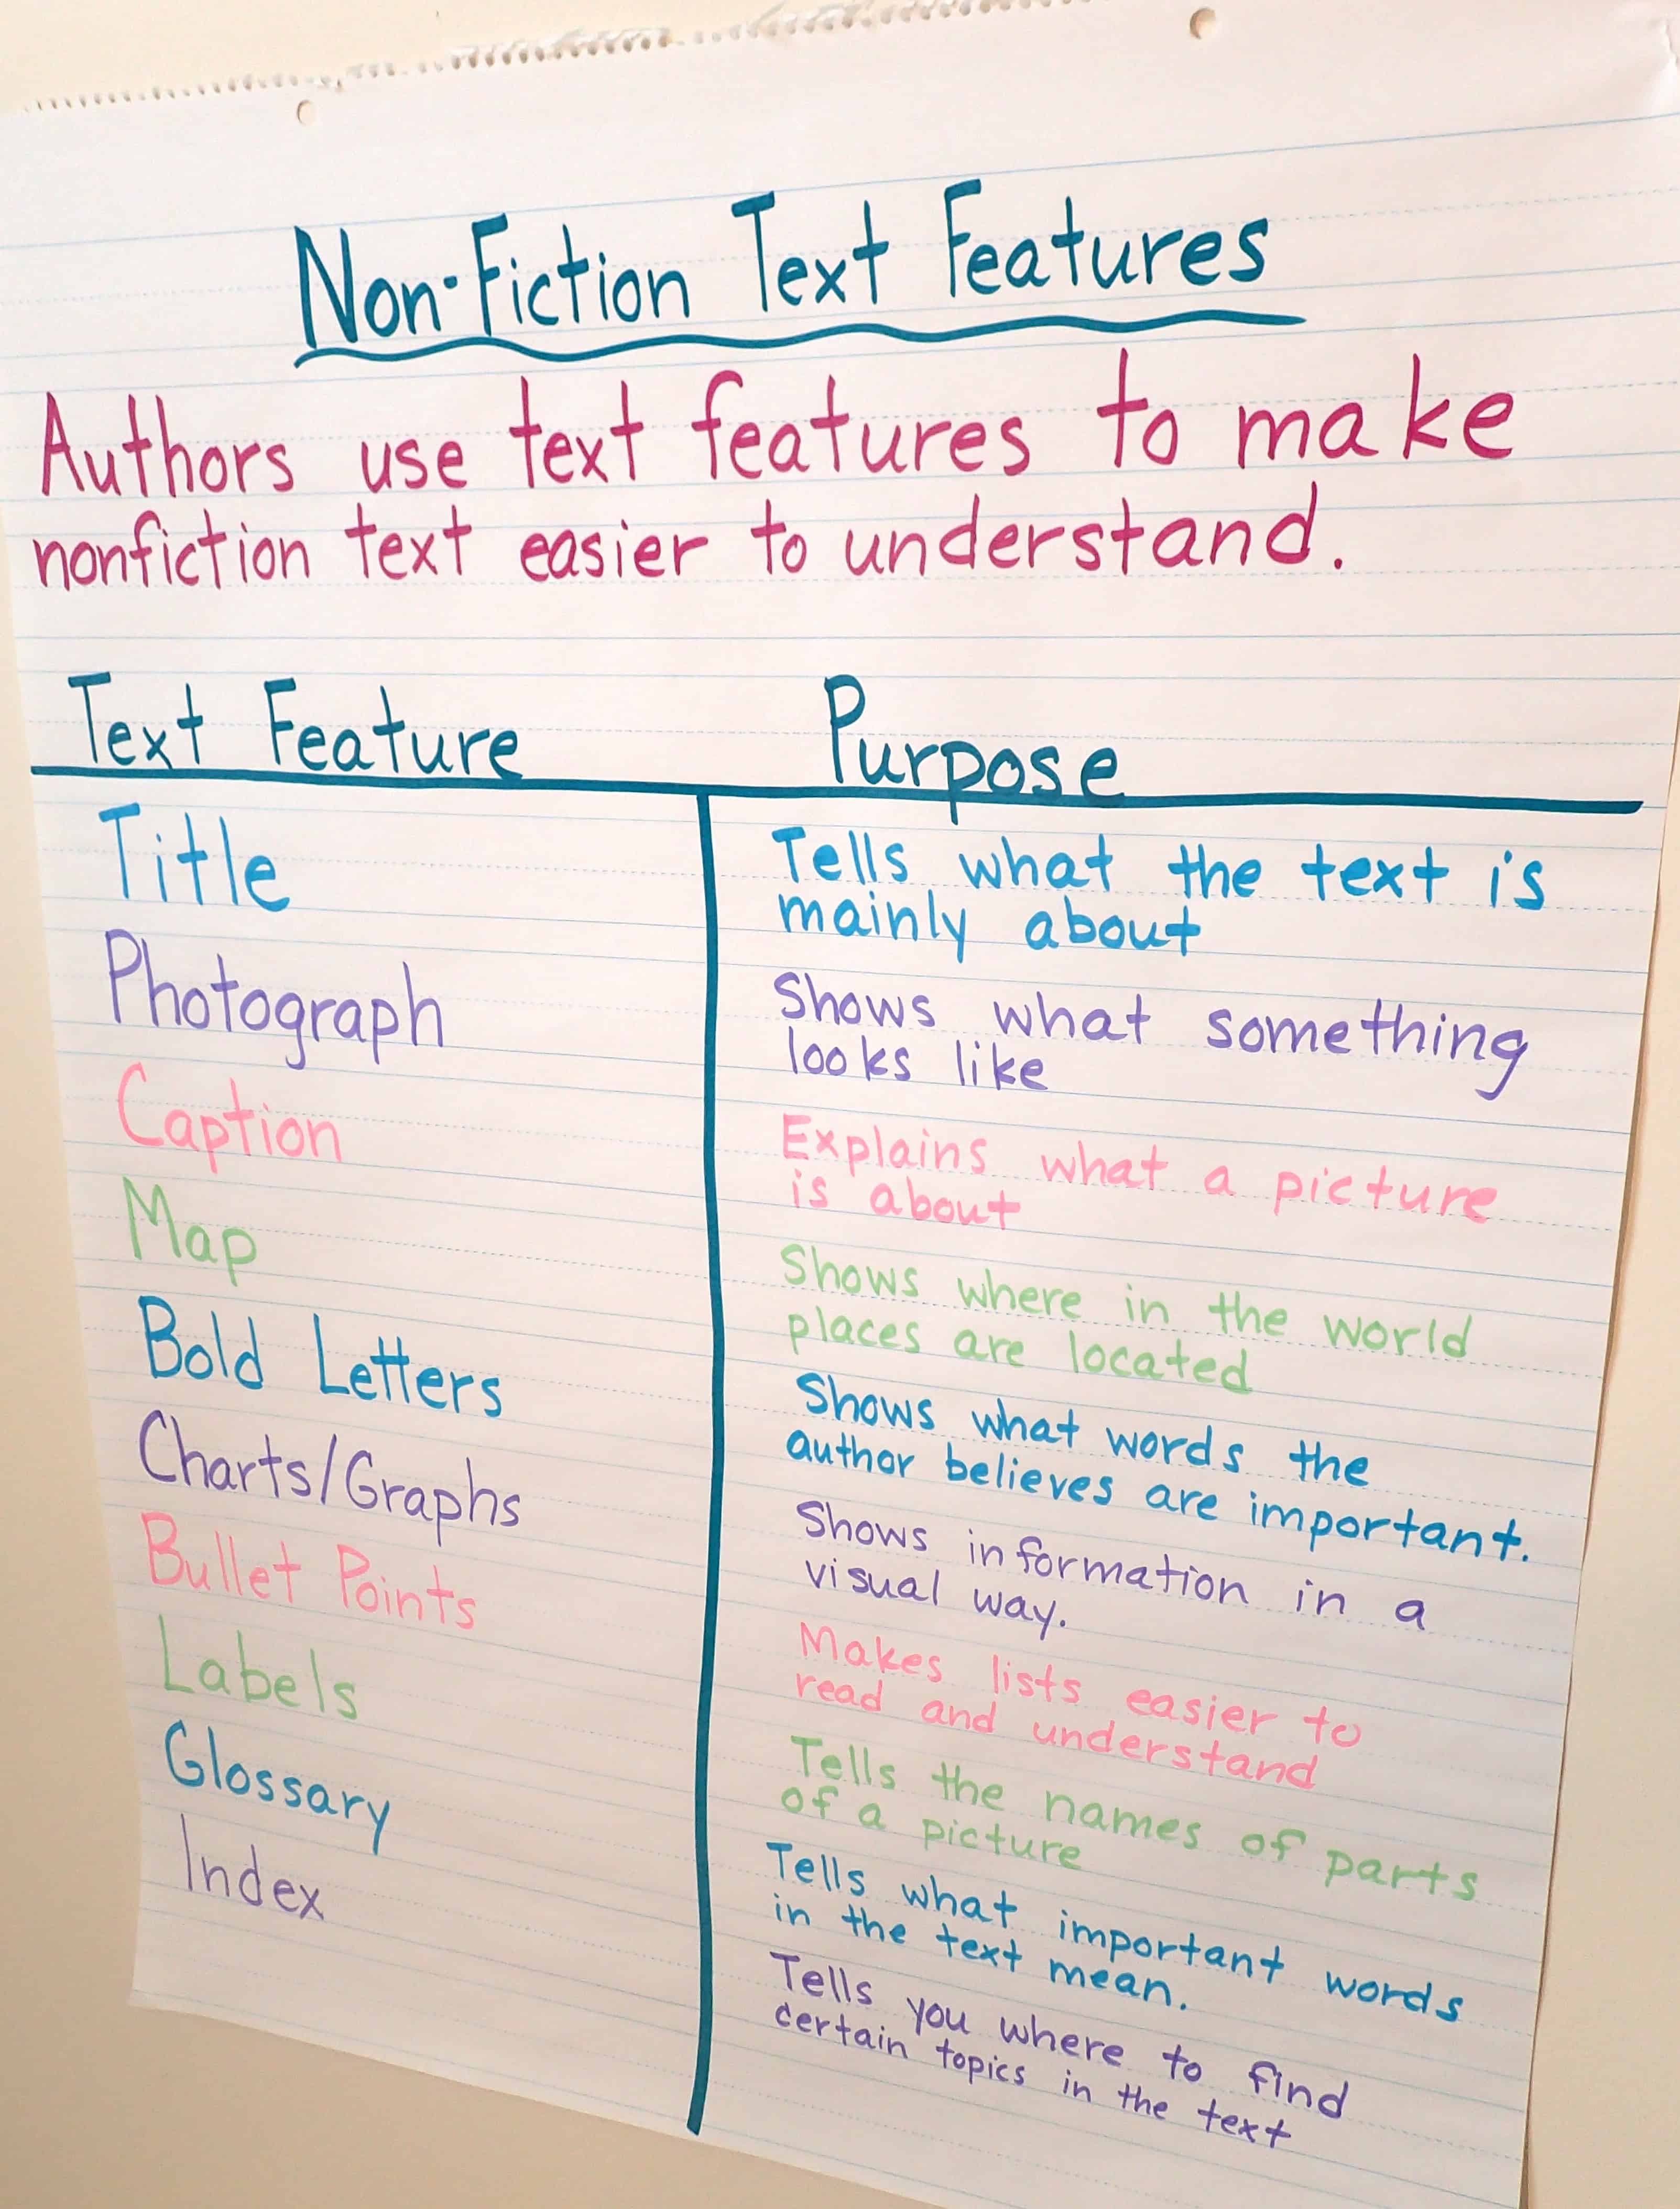 Explain the purpose of different nonfiction text features to 3rd, 4th, and 5th grade students